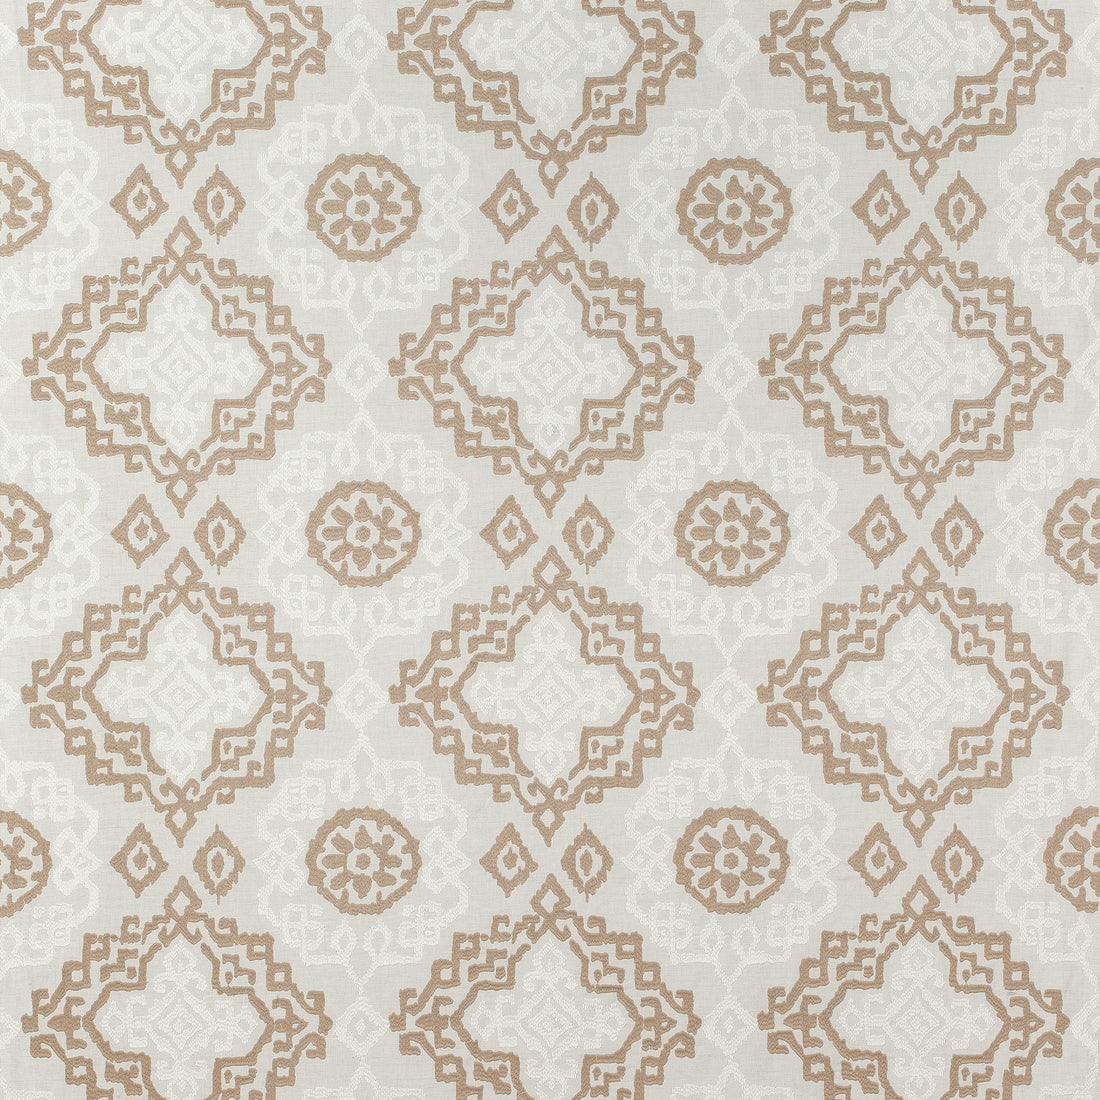 Scottsdale Embroidery fabric in neutral color - pattern number AW73019 - by Anna French in the Meridian collection